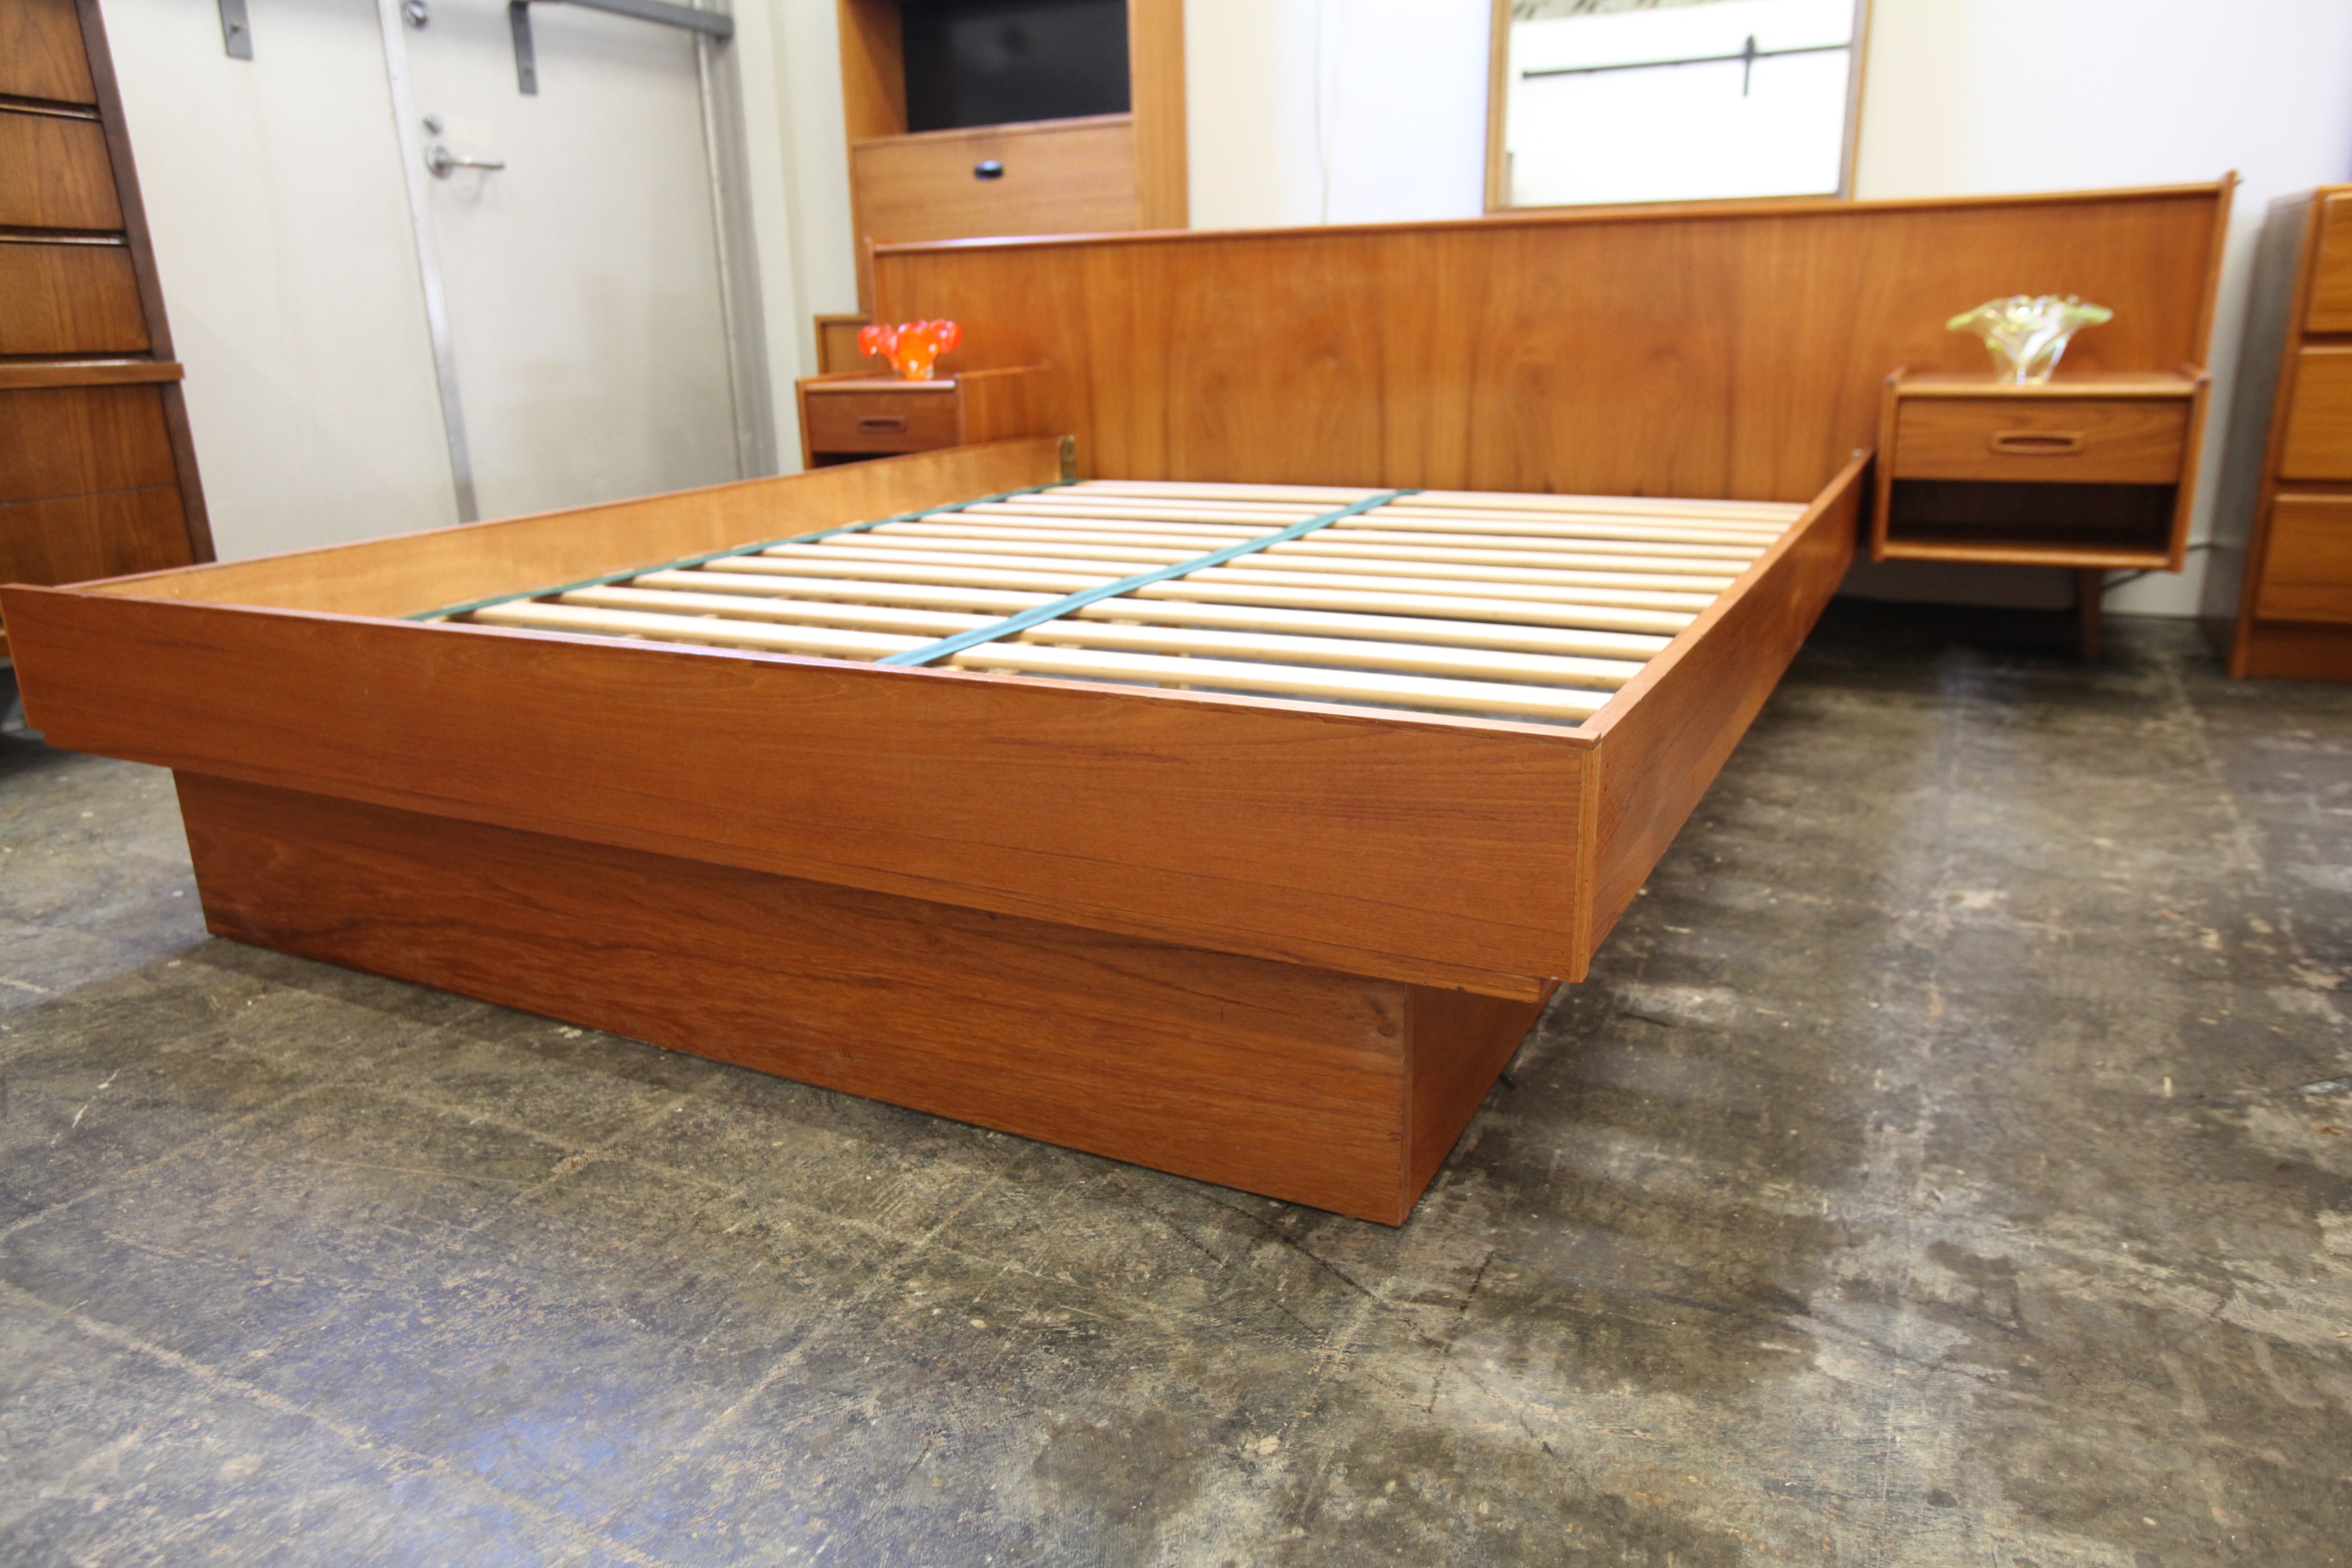 Vintage Queen Teak Bed w/ Floating Night Stands (97.25"W x 30.5"H x 81.25"D)